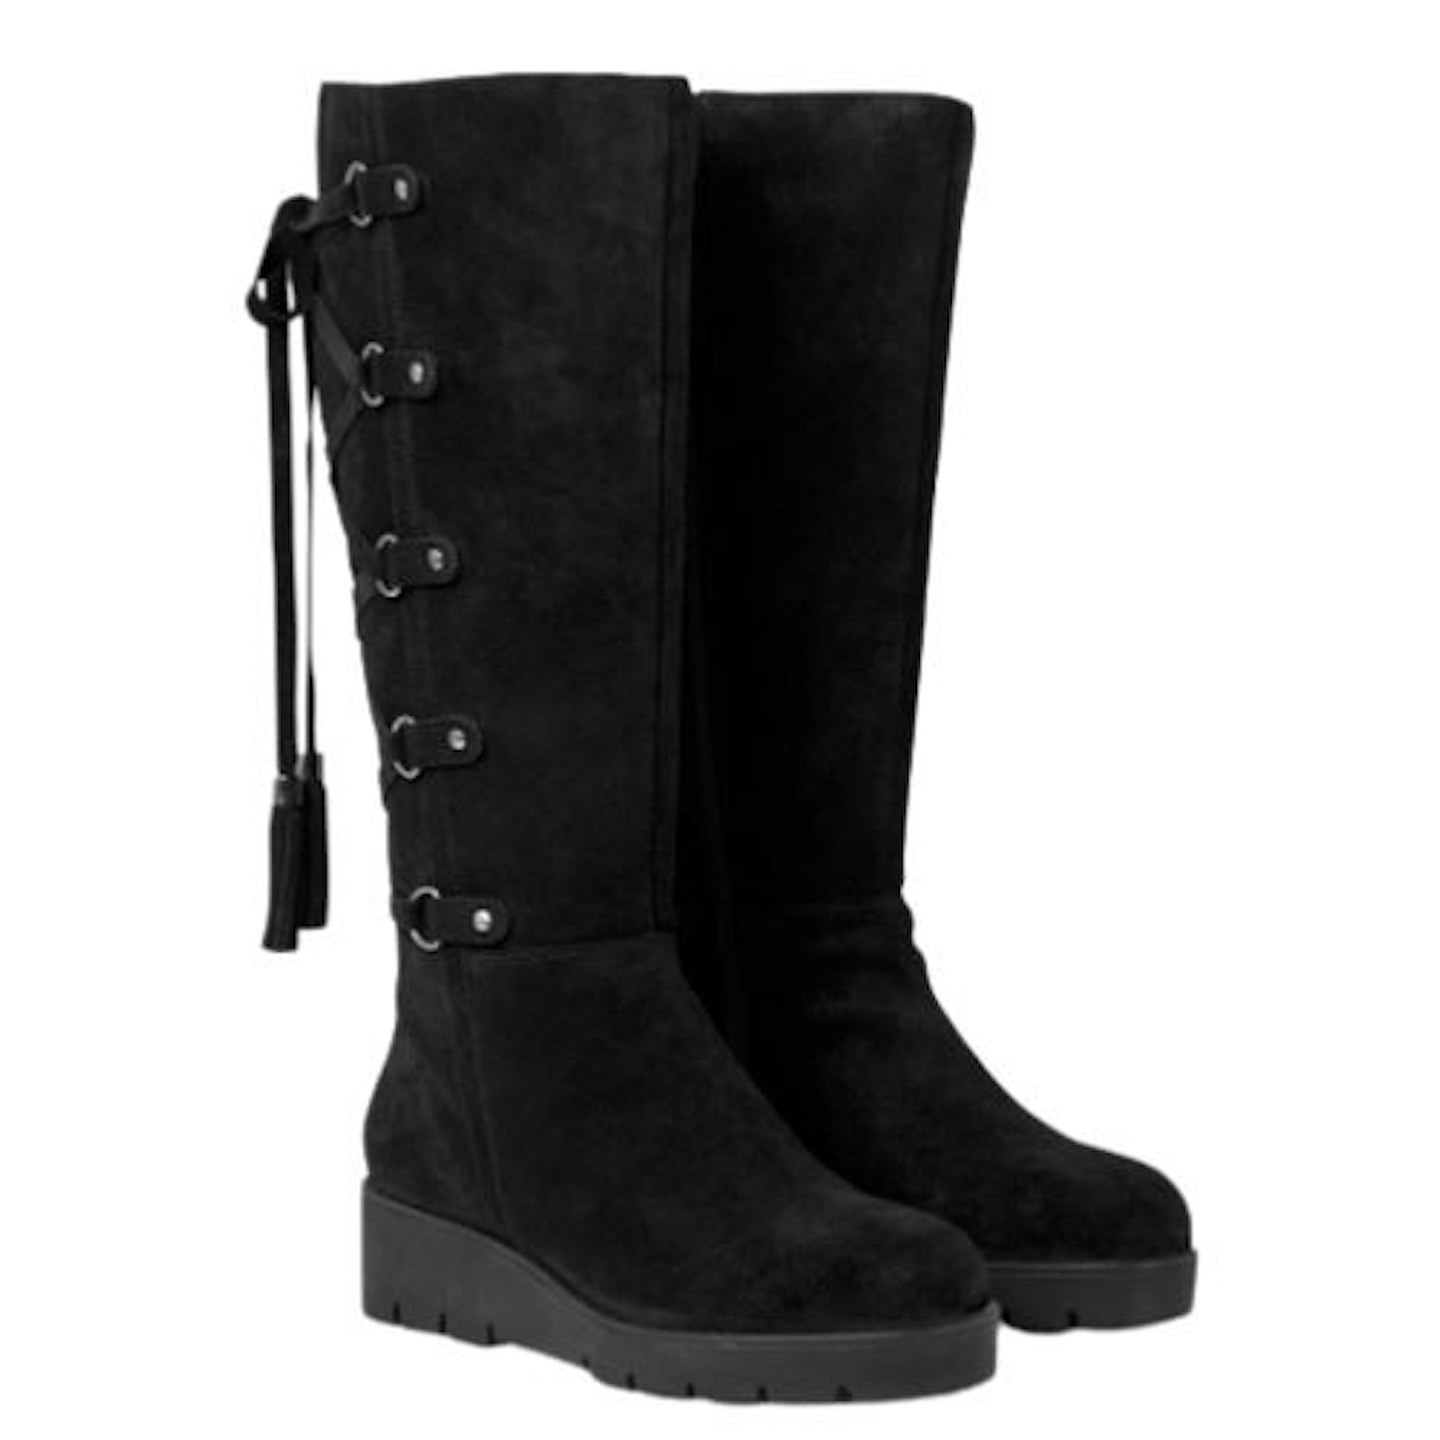 Joe Browns Suede Lace Up Boots Super Curvy Calf EEE Fit